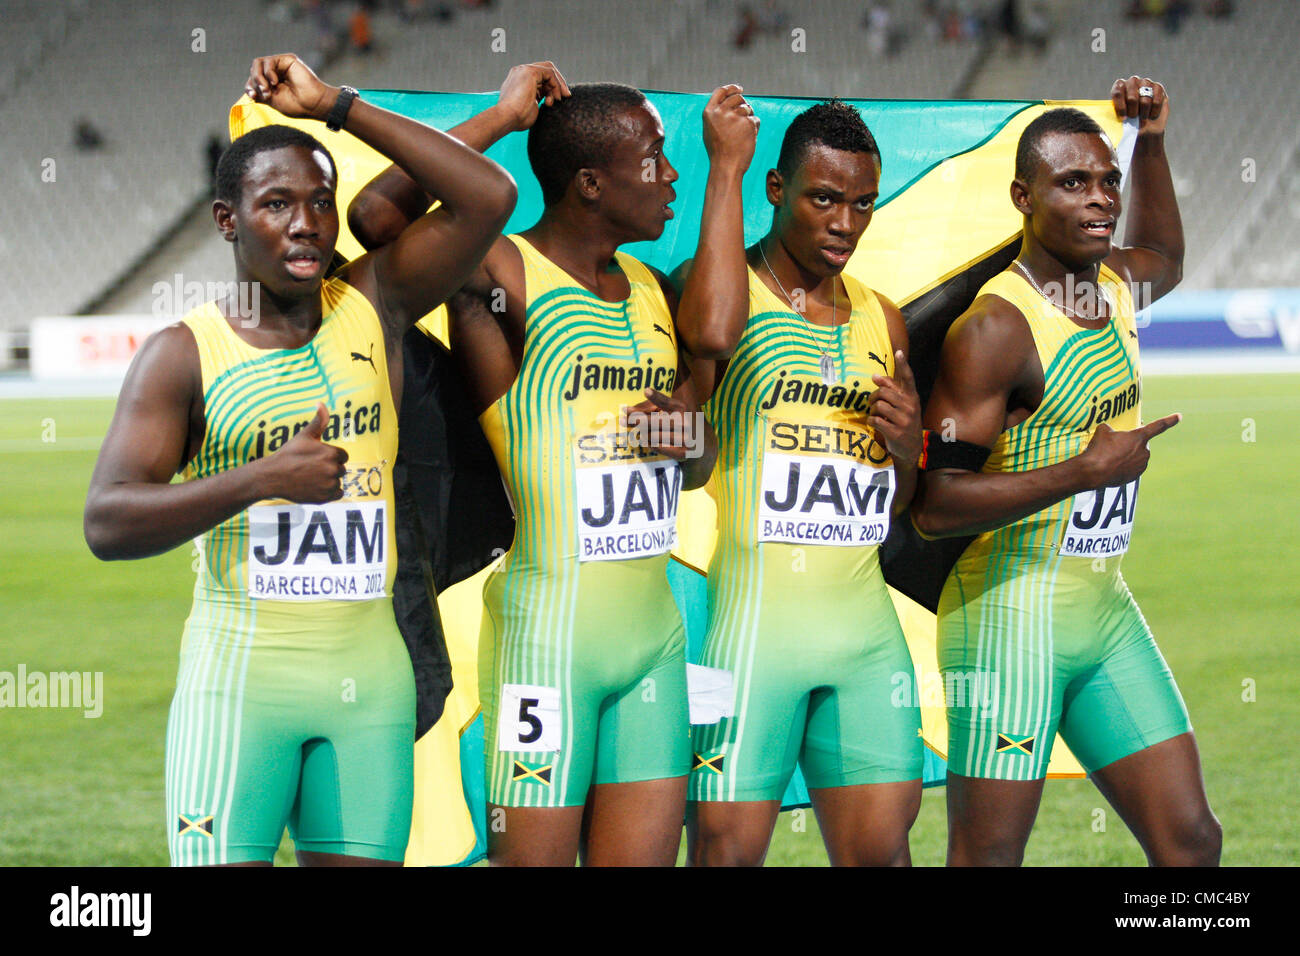 14.07.2012 Barcelona, Spain. Jamaica team wins silver medal 4x100 Metres Relay for Men during day 5 of the IAAF World Junior Championships from the Montjuic Olympic Stadium in Barcelona. Stock Photo